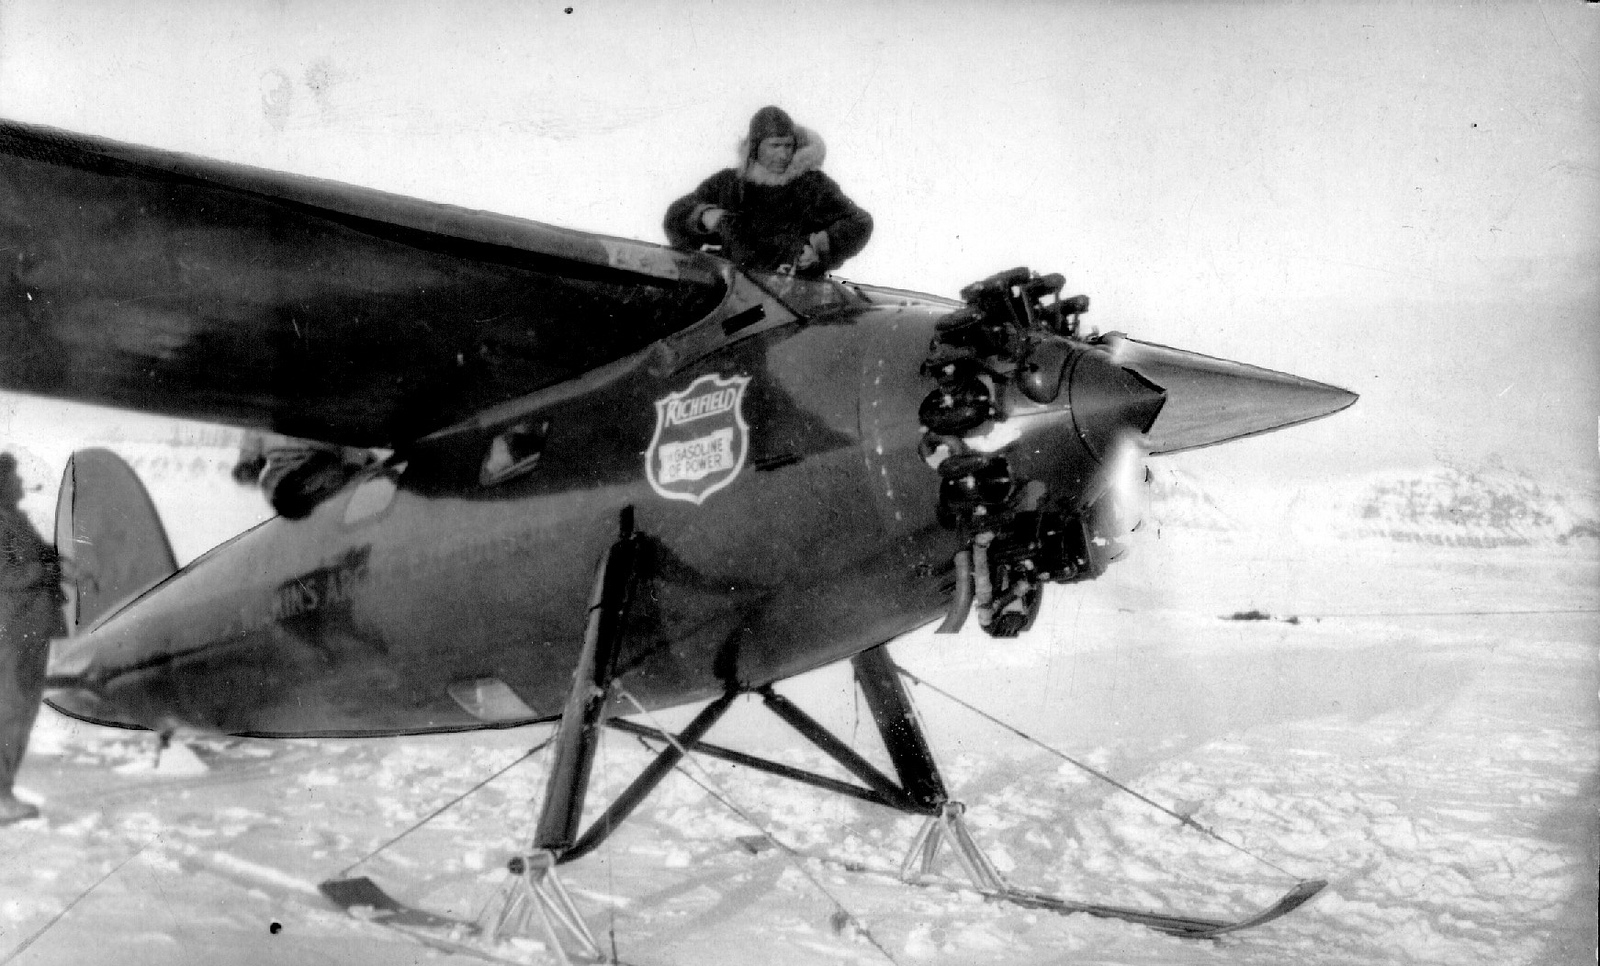 Ben Eielson stands in the cockpit of the Lockheed Vega. The Wright Whirlwind engine is running. Note that the wood skis have been installed.